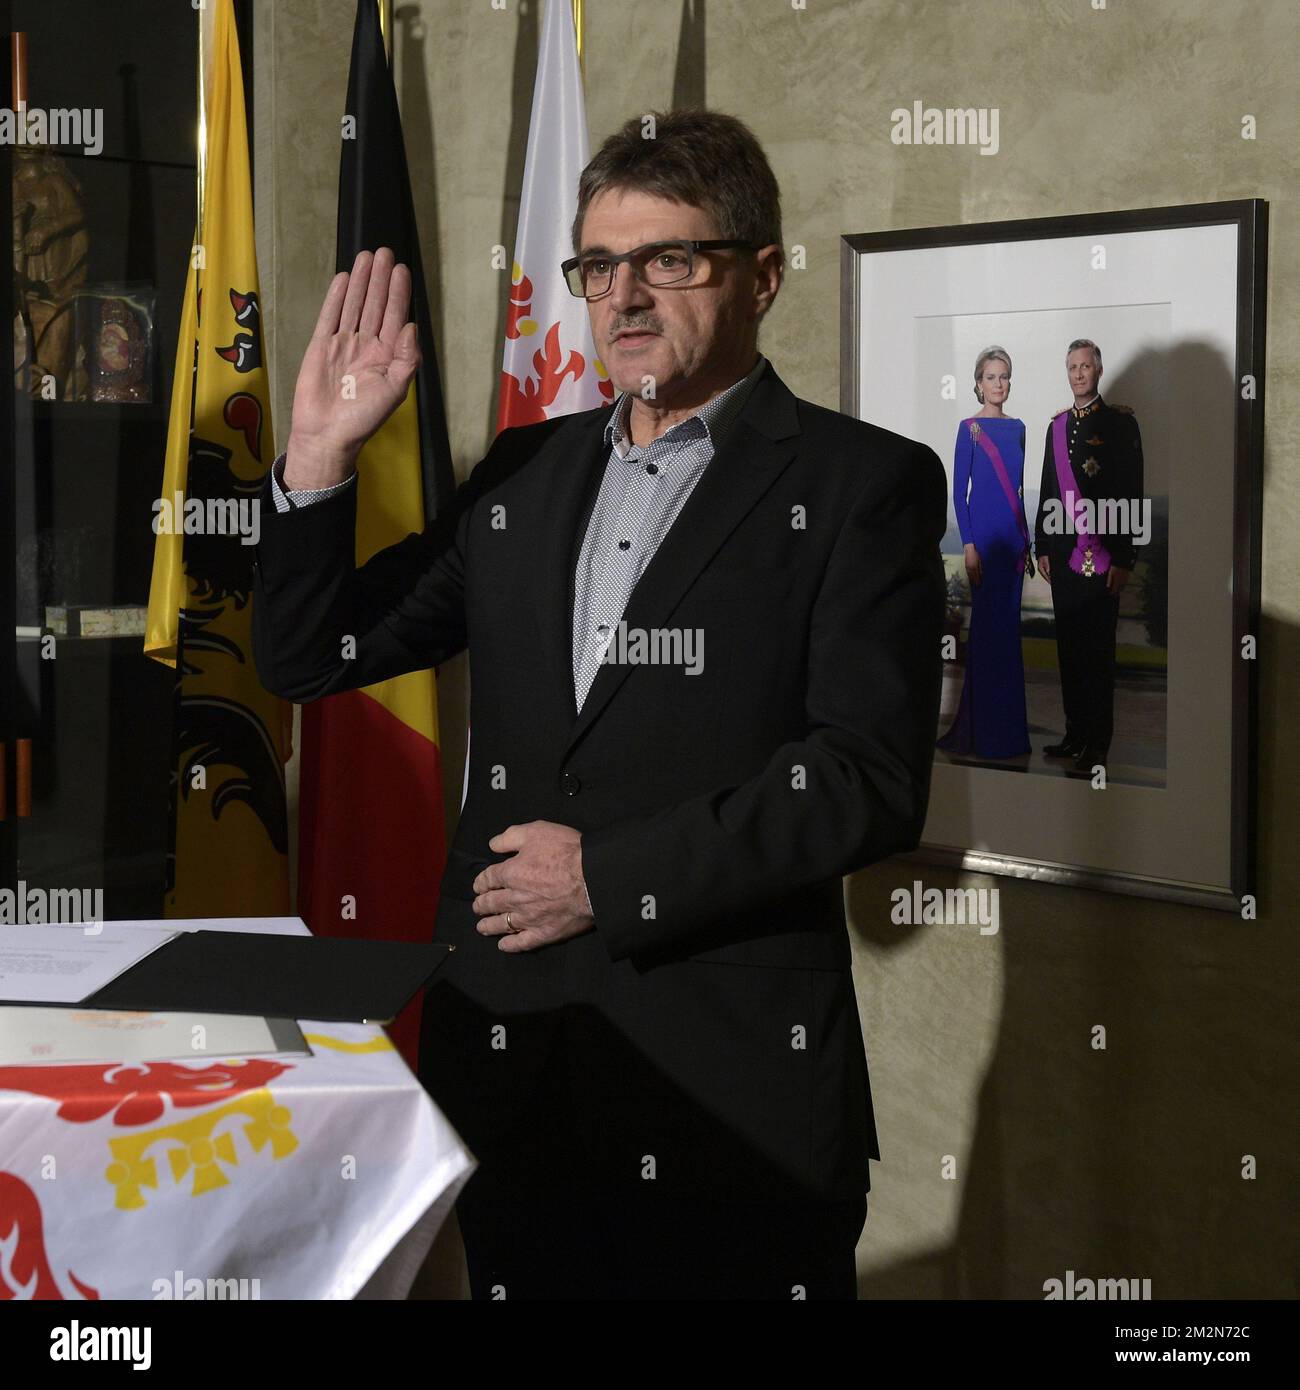 Future Herstappe mayor Leon Lowet pictured during an oath taking ceremony for the future mayors of several cities in the Limburg province, Wednesday 19 December 2018 in Hasselt. BELGA PHOTO YORICK JANSENS Stock Photo